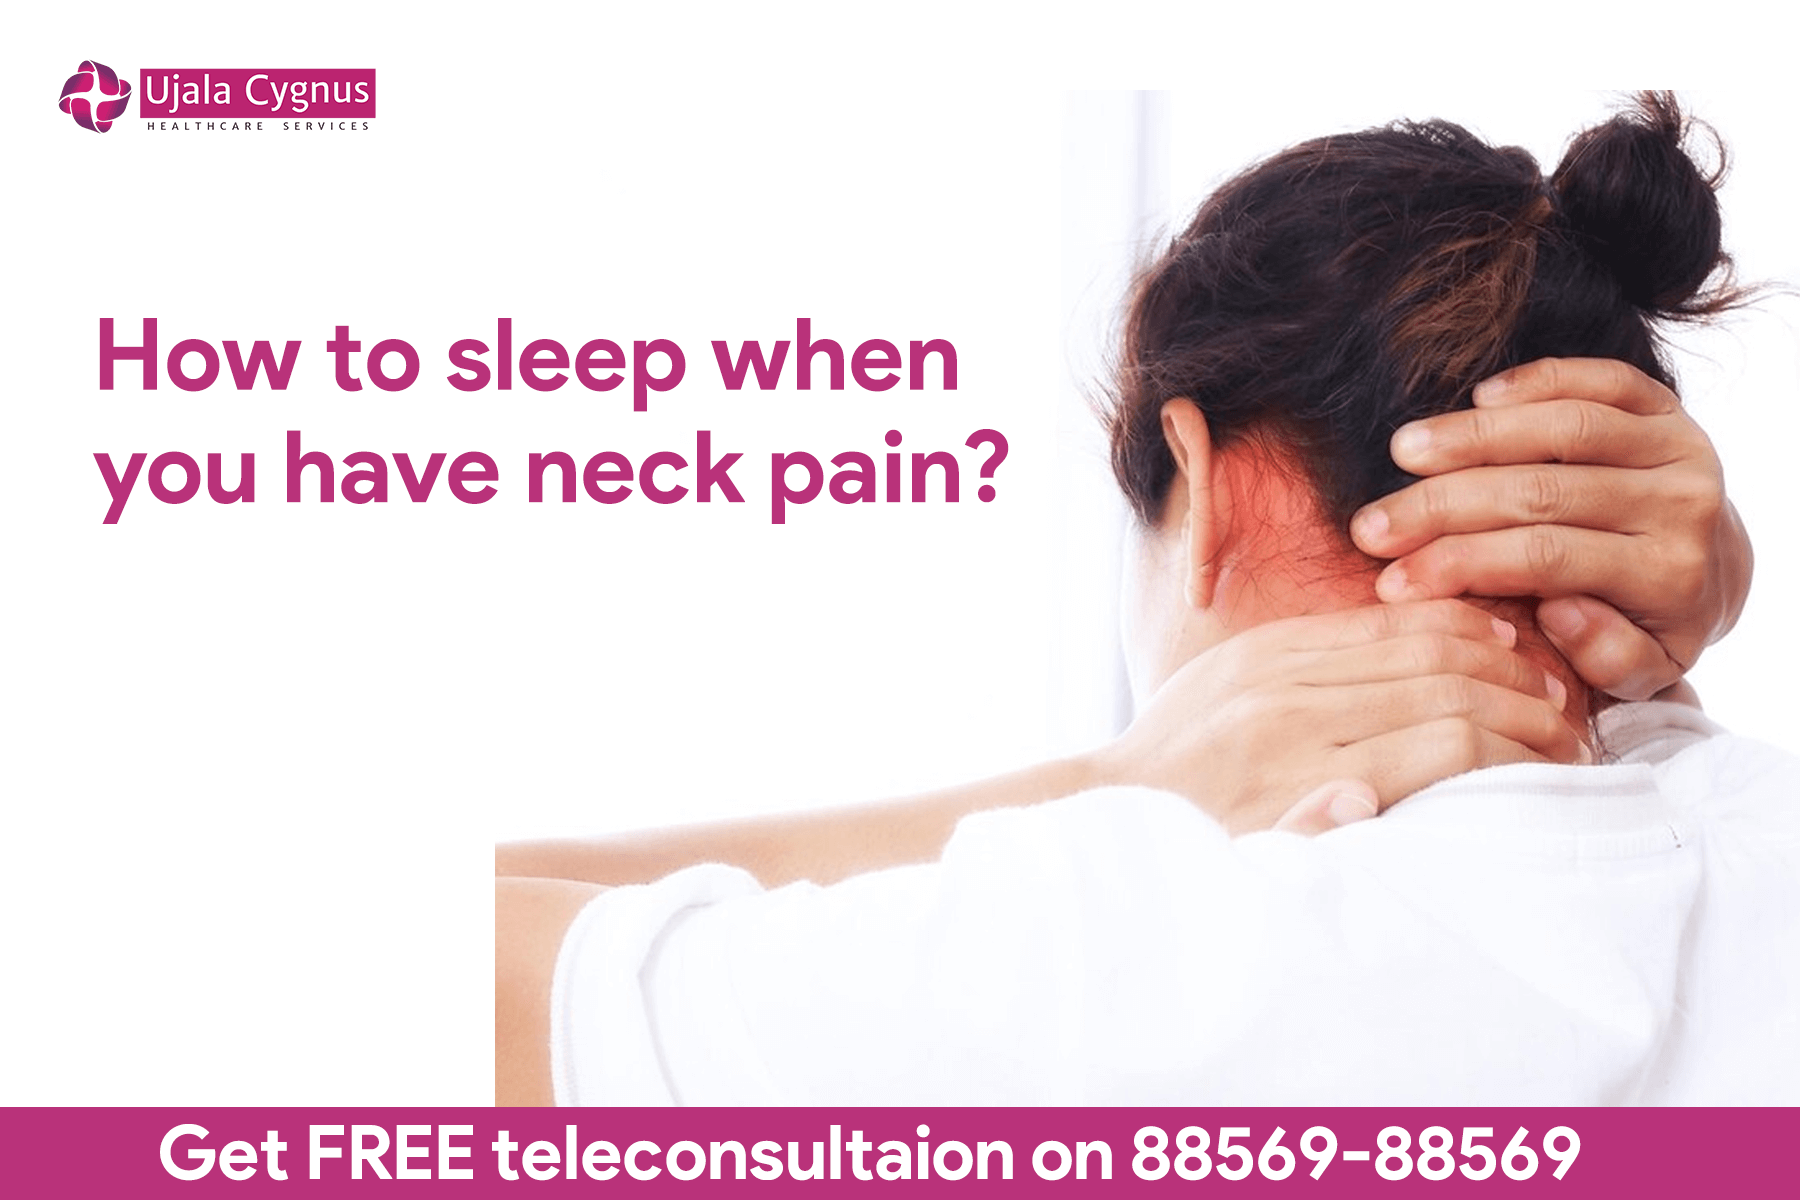 How to sleep when you have neck pain?